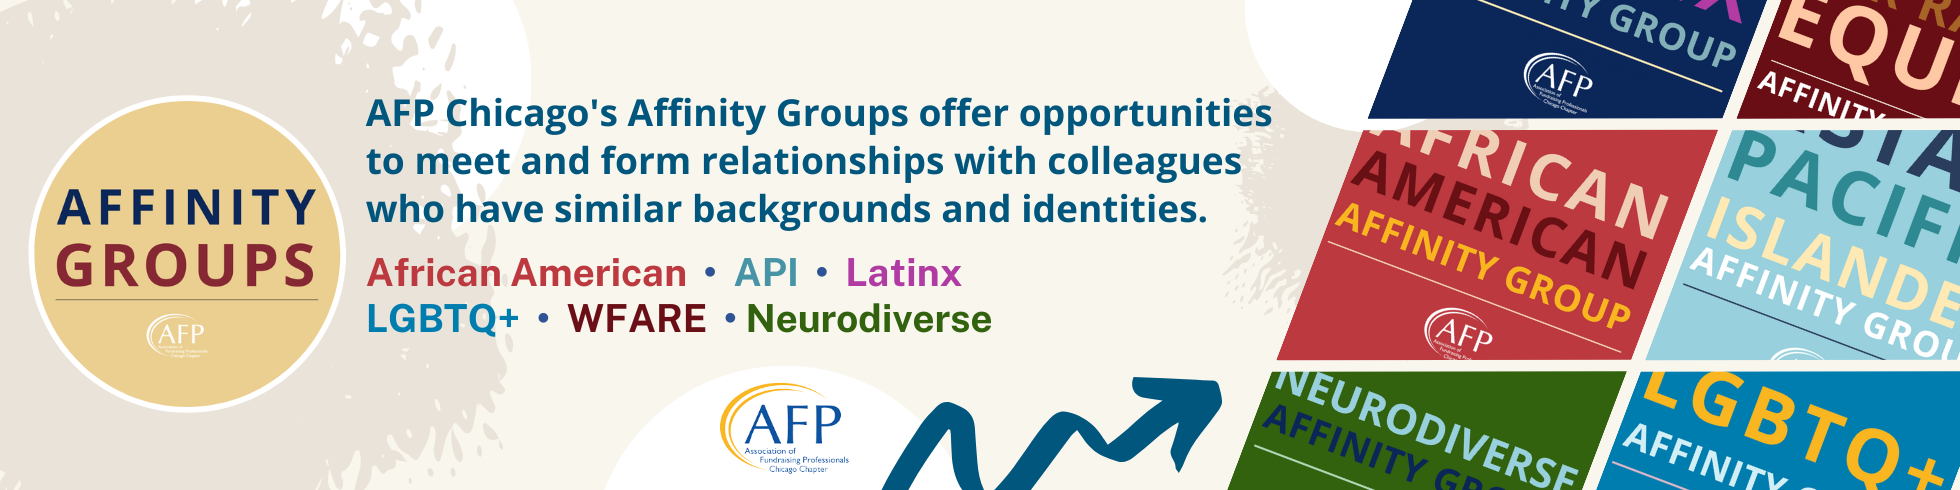 affinity_groups